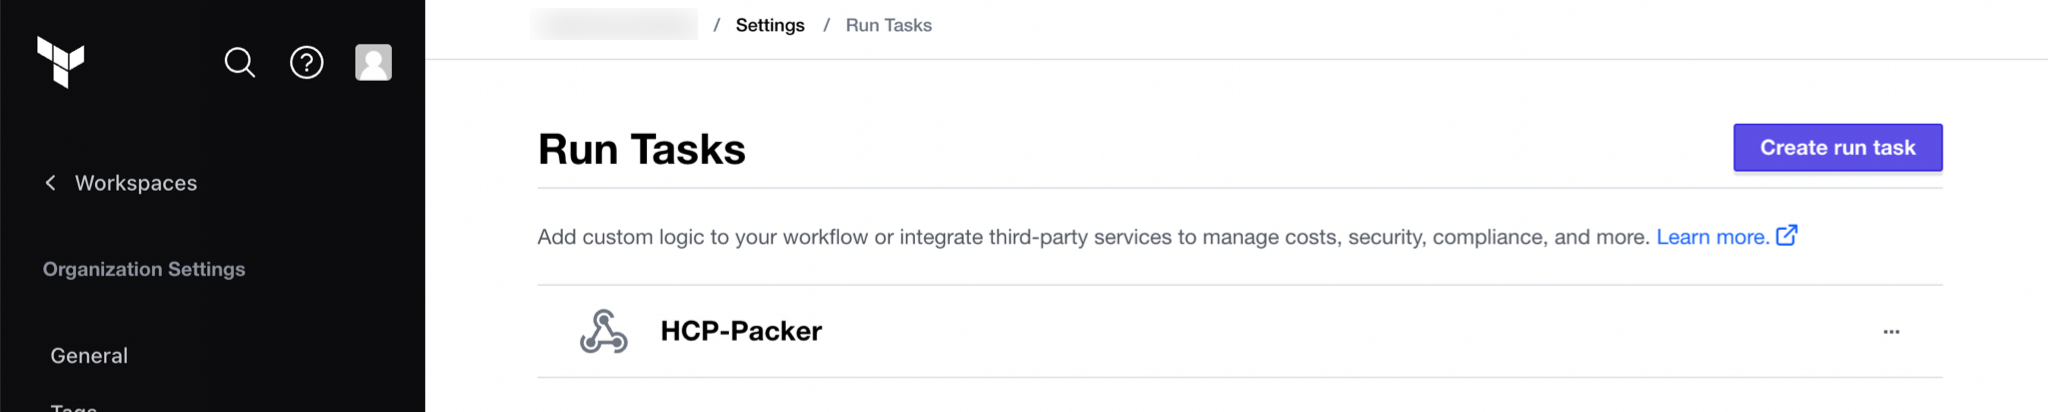 Run task page with HCP Packer run task